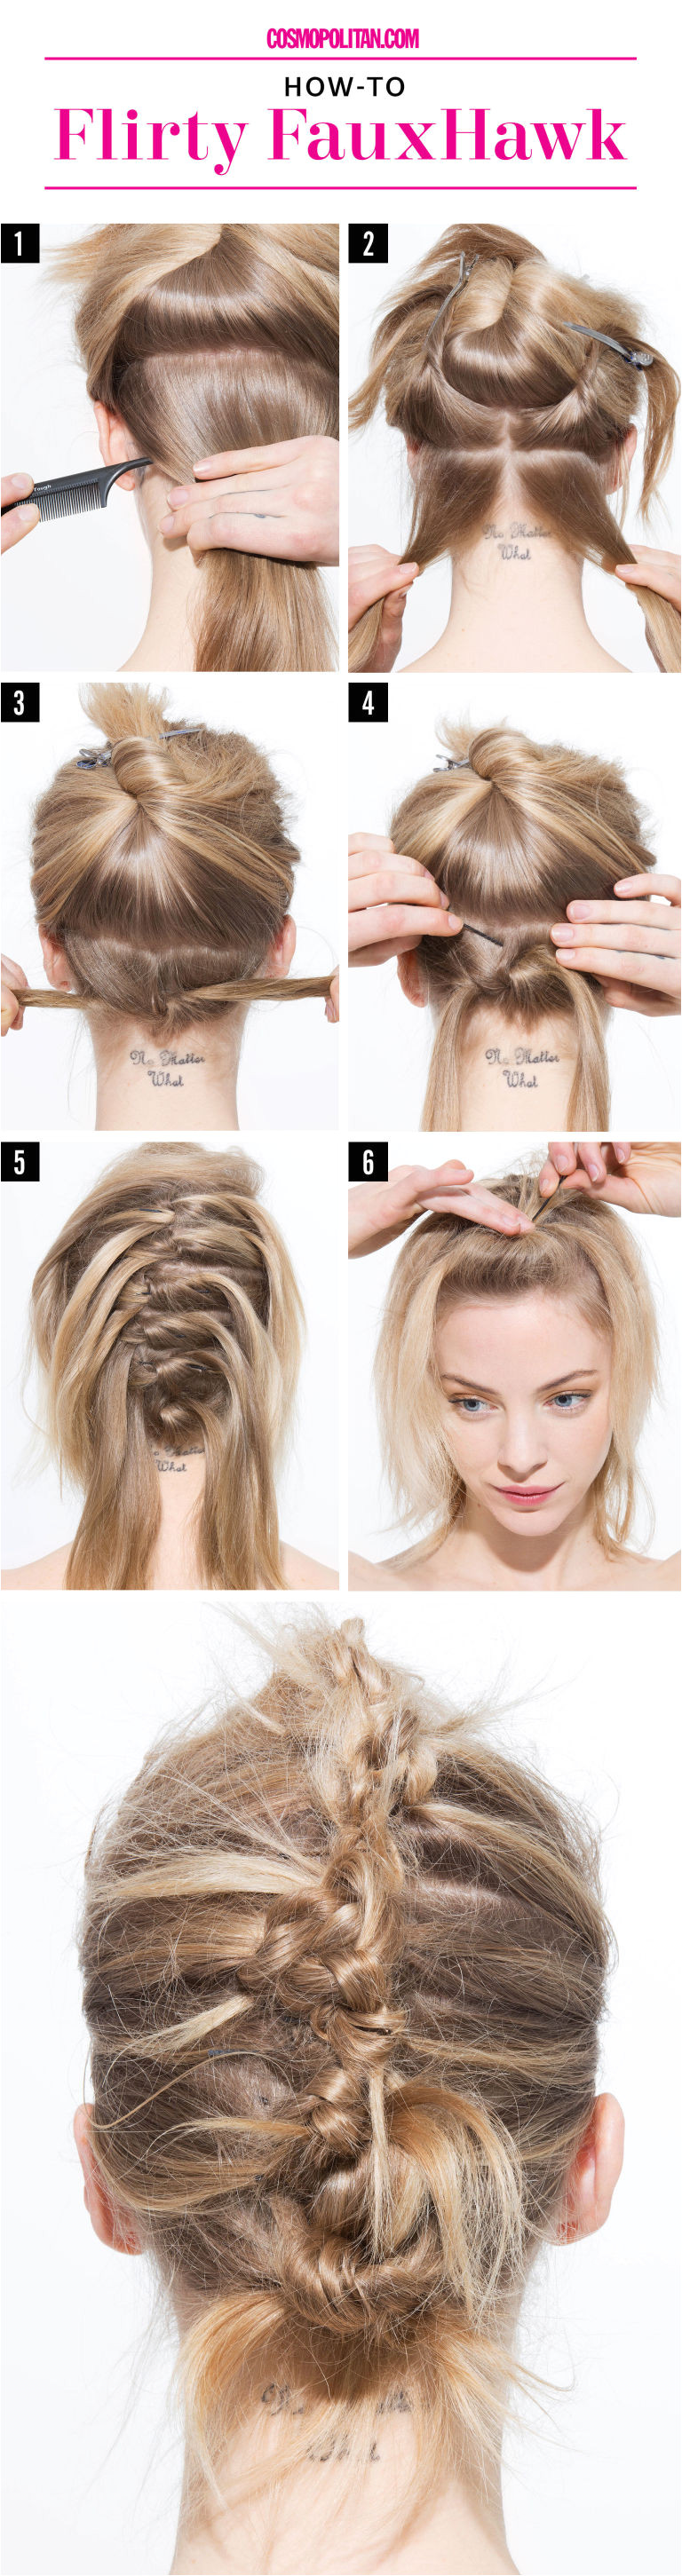 Easy Hairstyles that Don T Include Braids 4 Last Minute Diy evening Hairstyles that Will Leave You Looking Hot